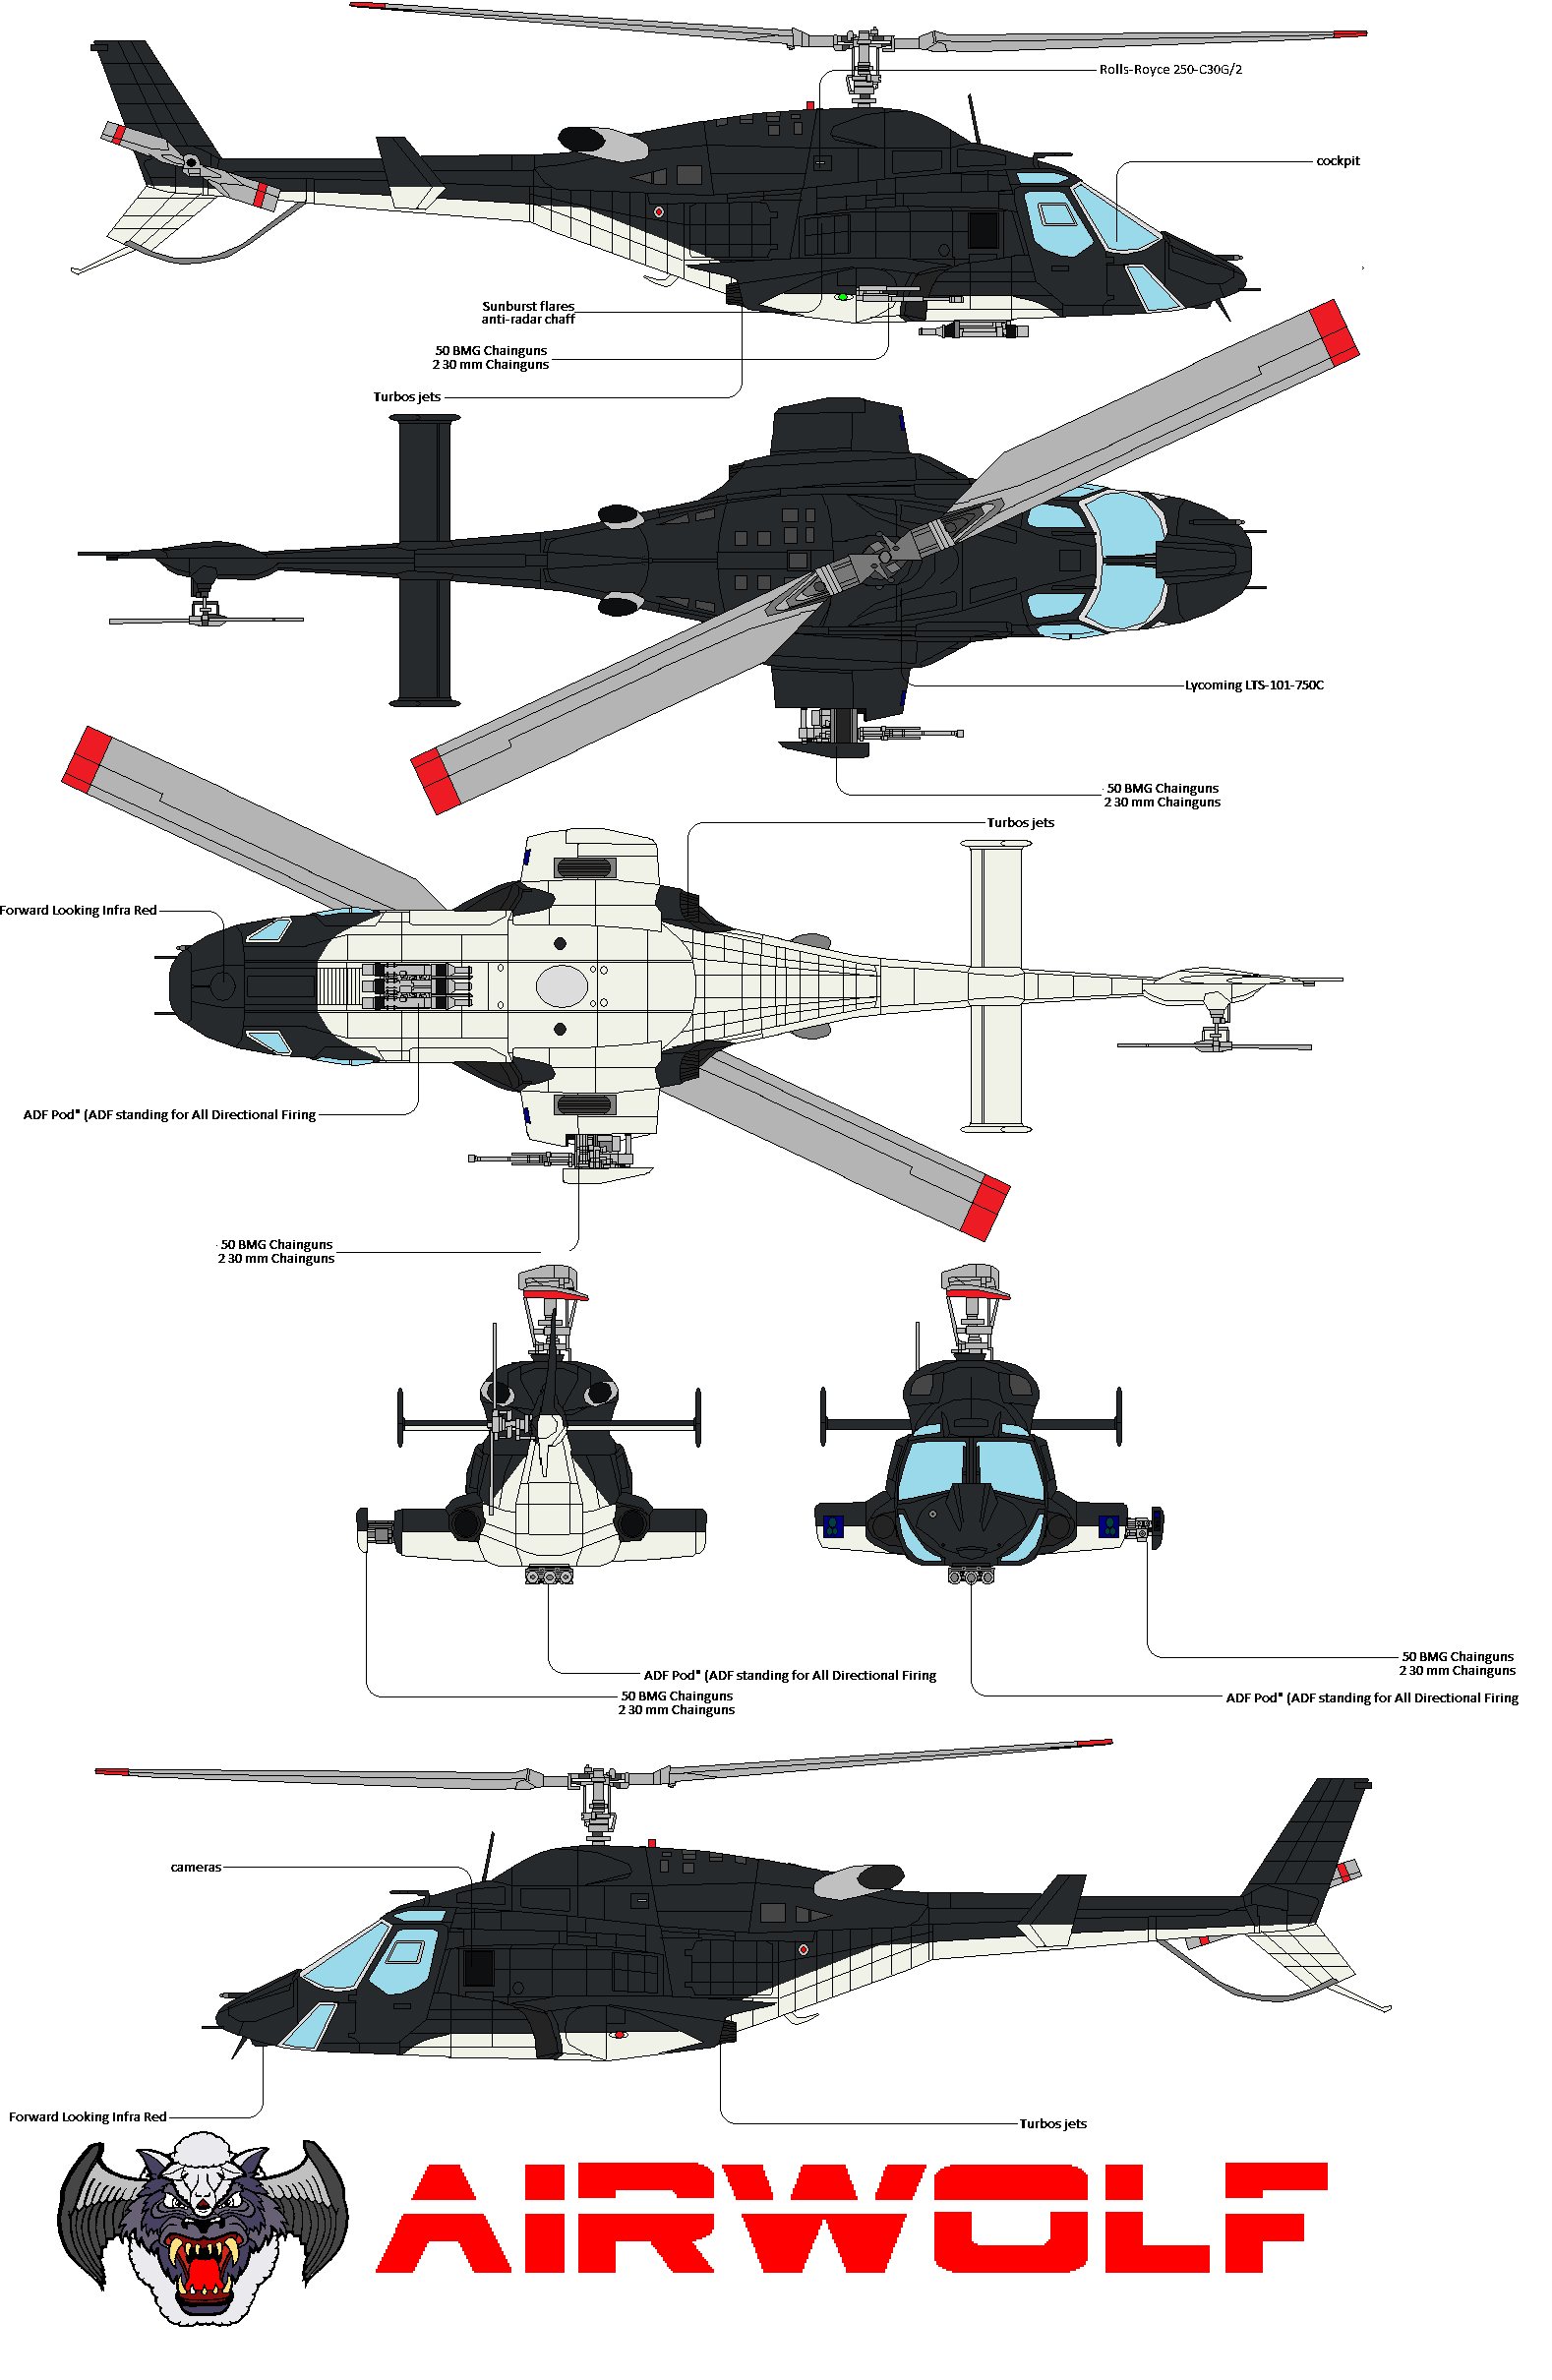 AIRWOLF bell 222 color call outs